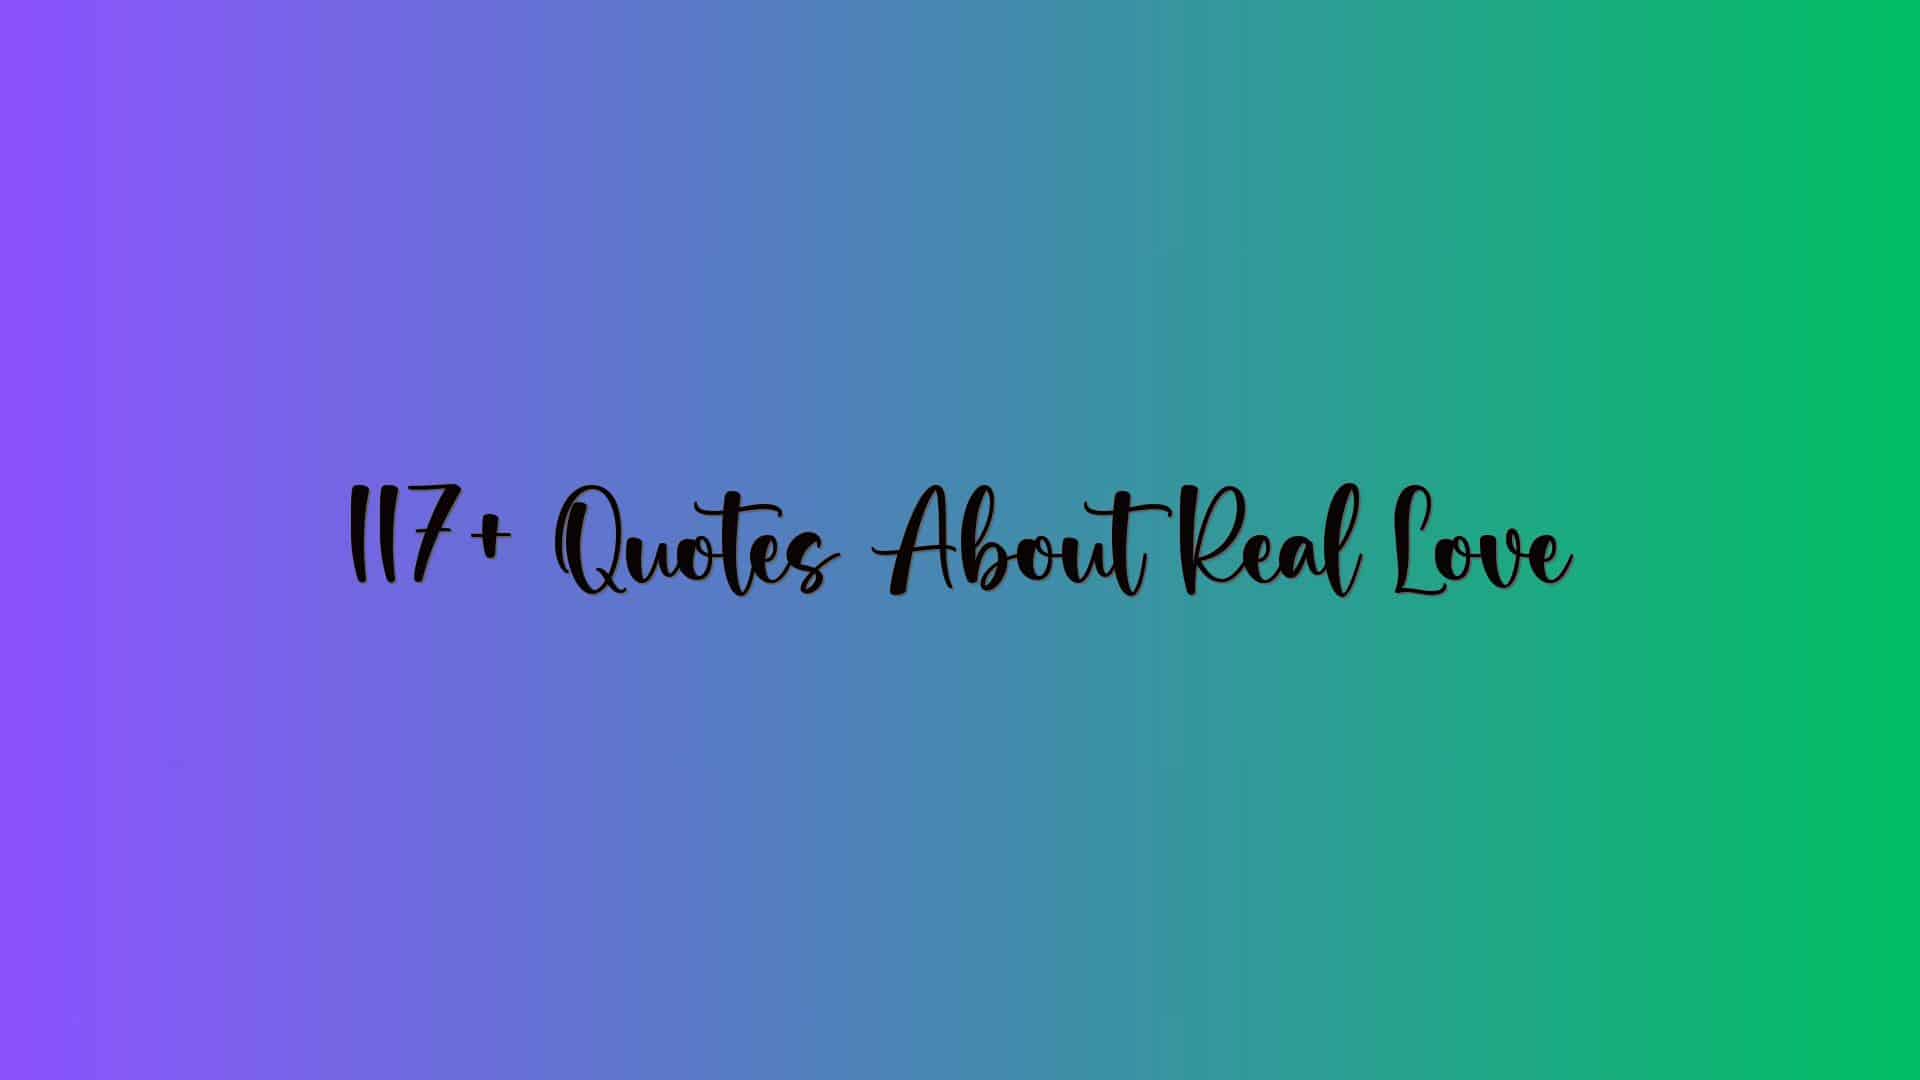 117+ Quotes About Real Love